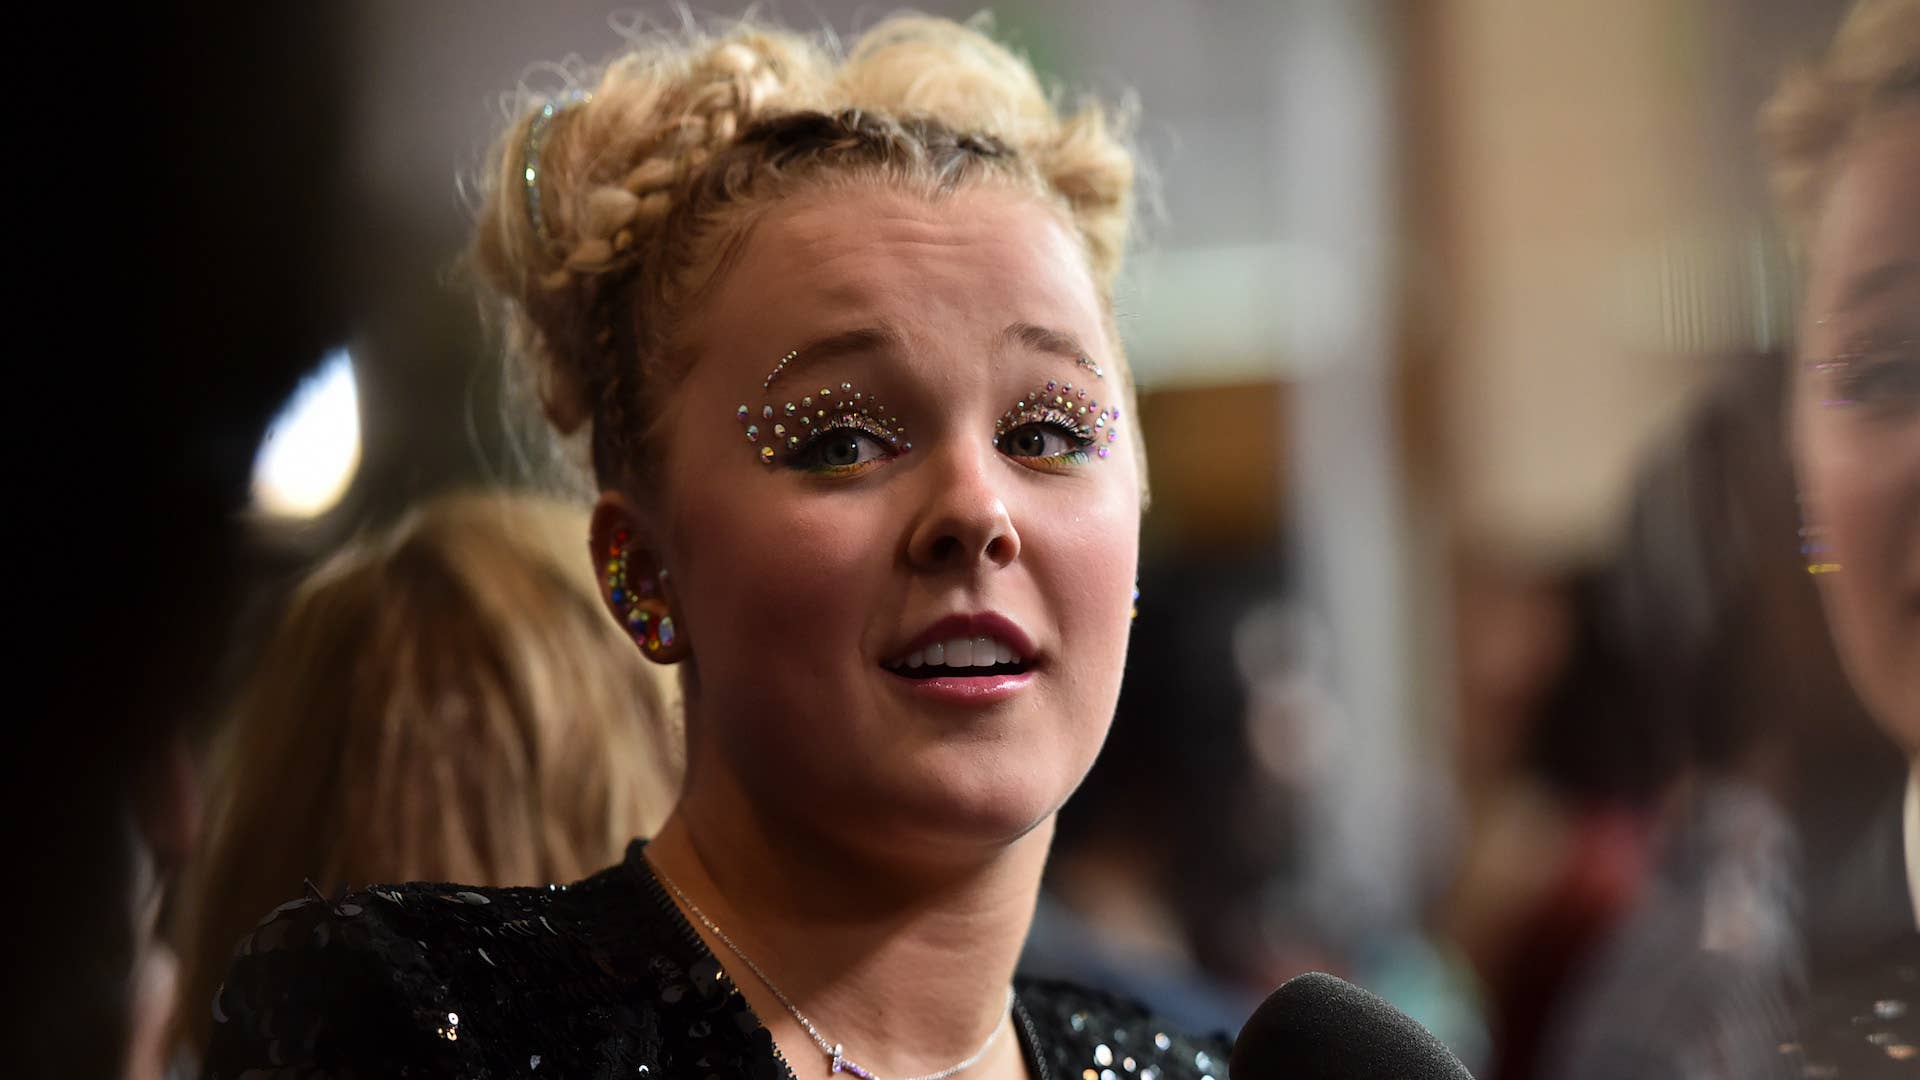 JoJo Siwa Says She Was 'Used' for Views and 'Clout' Following